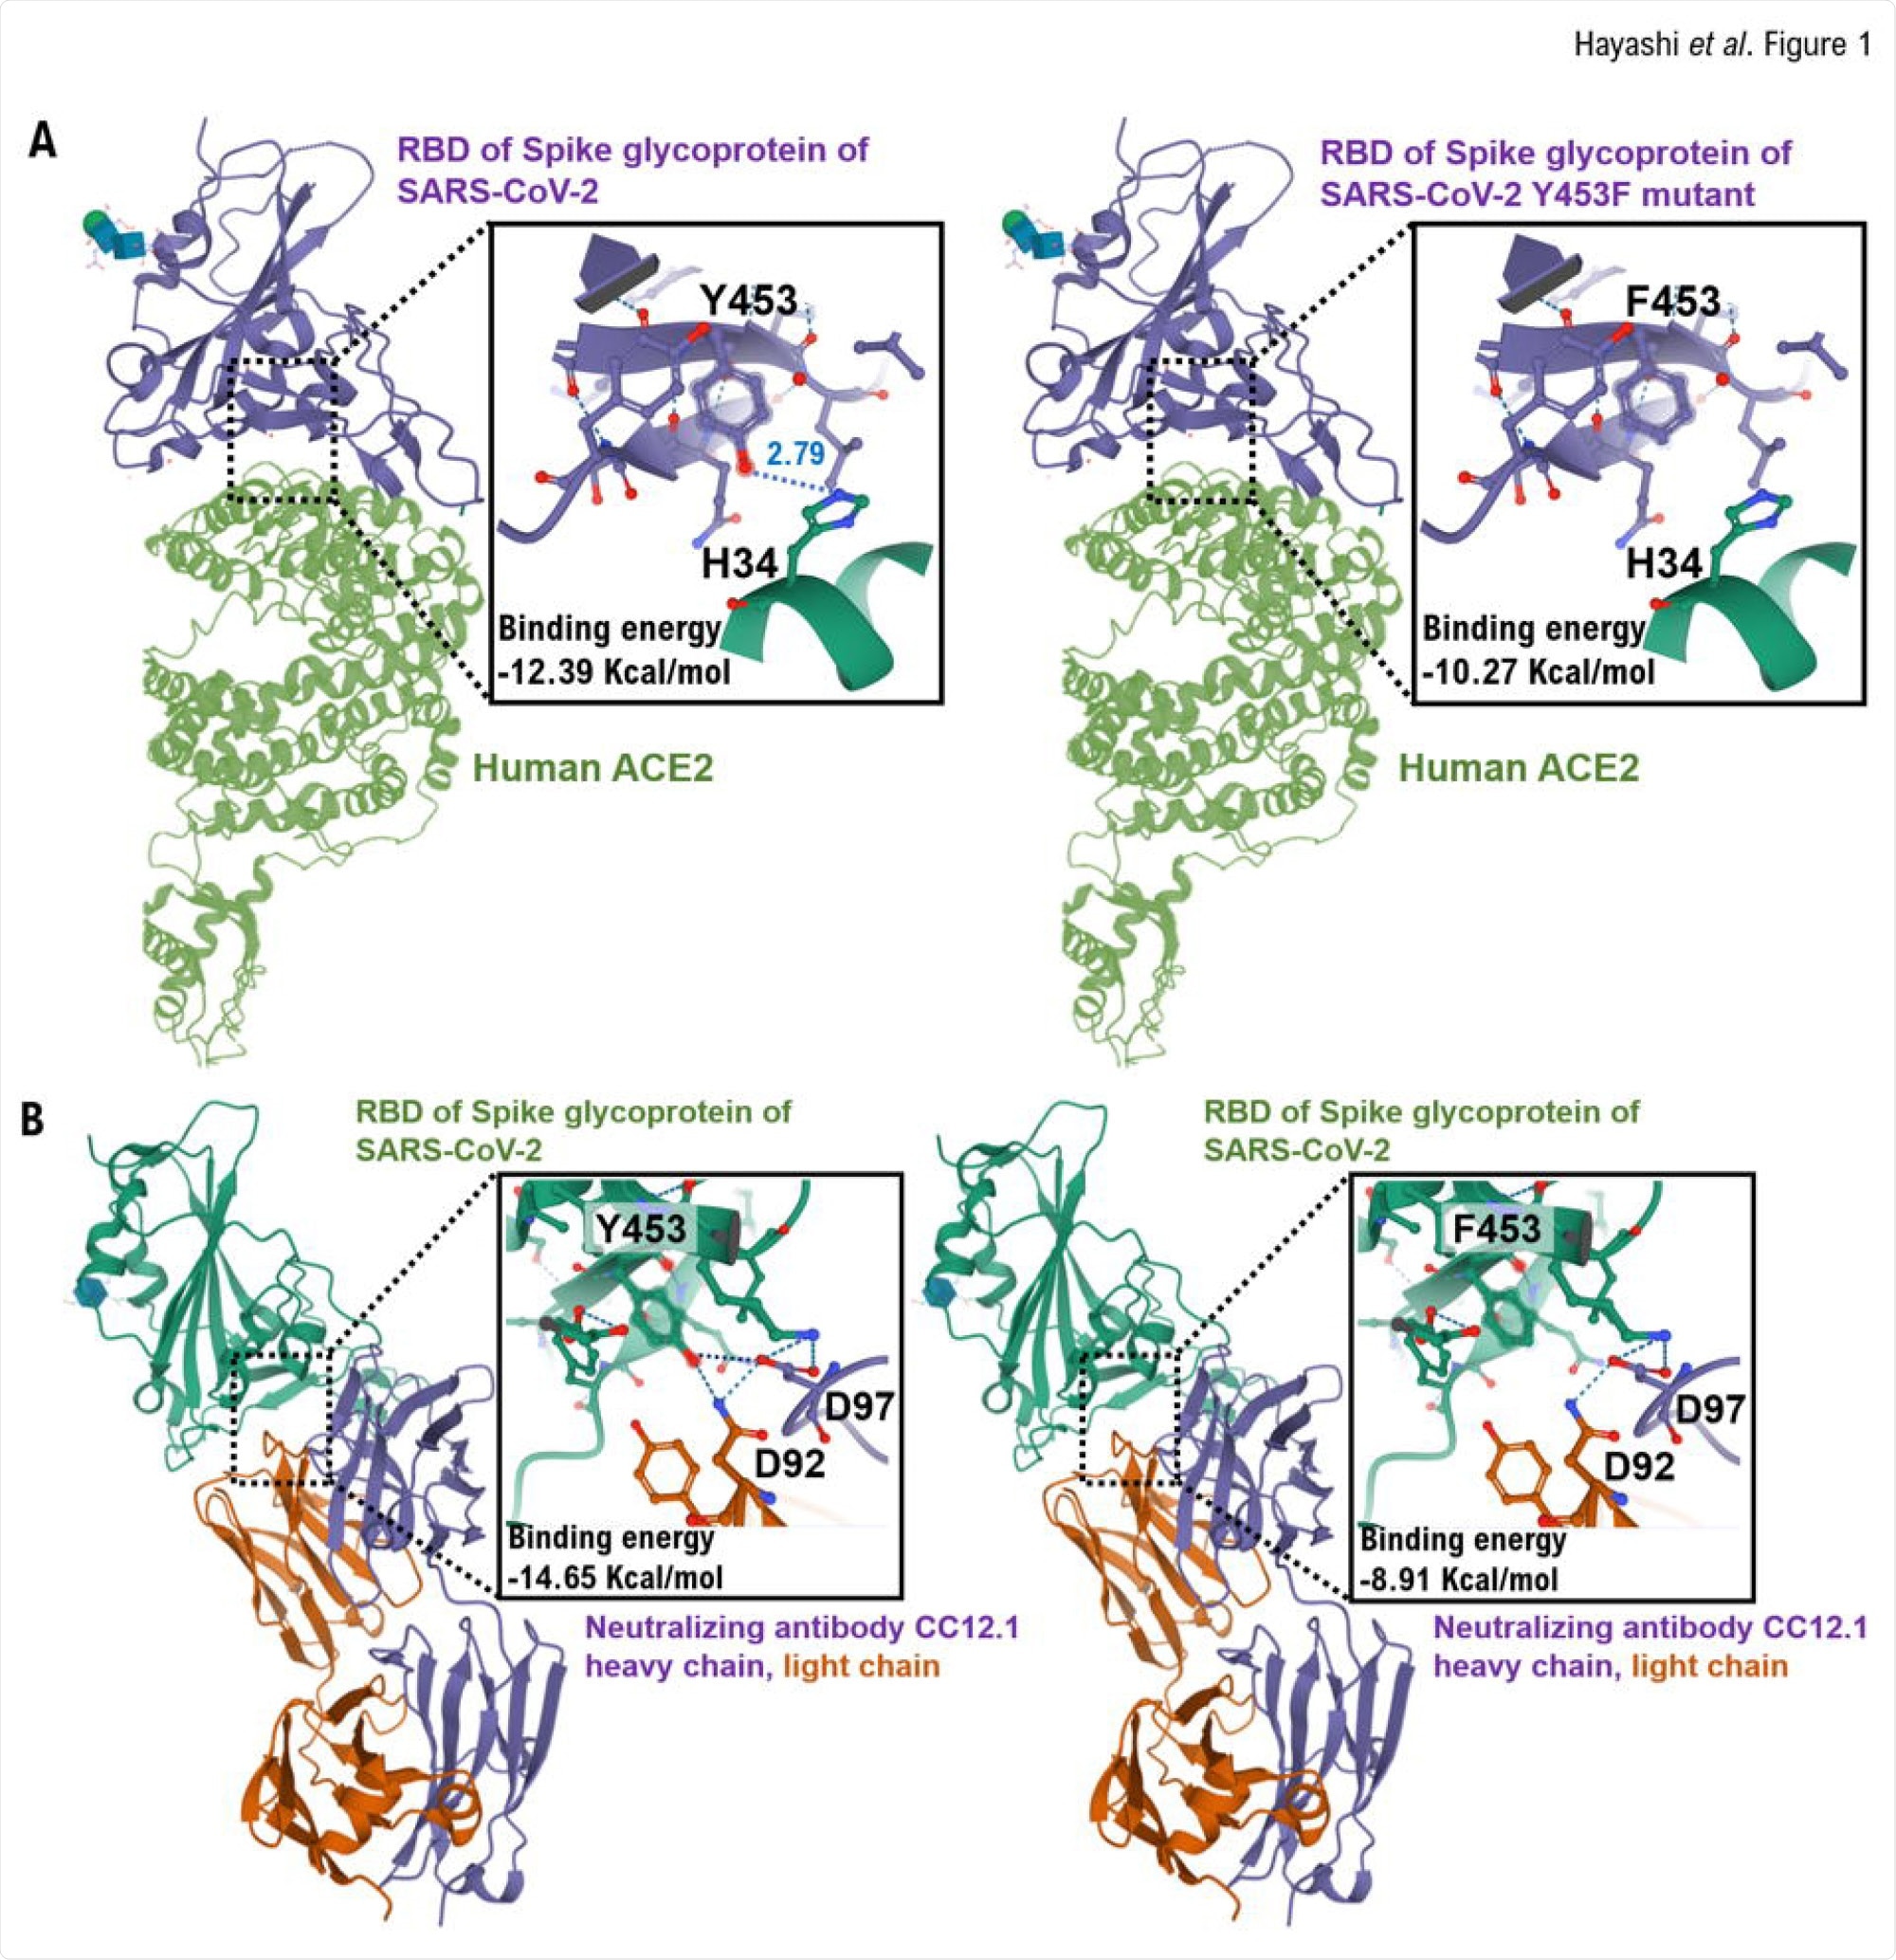 Interactions between the RBD and RBD Y453F mutant in the spike glycoprotein of SARS-CoV-2 and heavy chain of neutralizing monoclonal antibody (CC12.2).